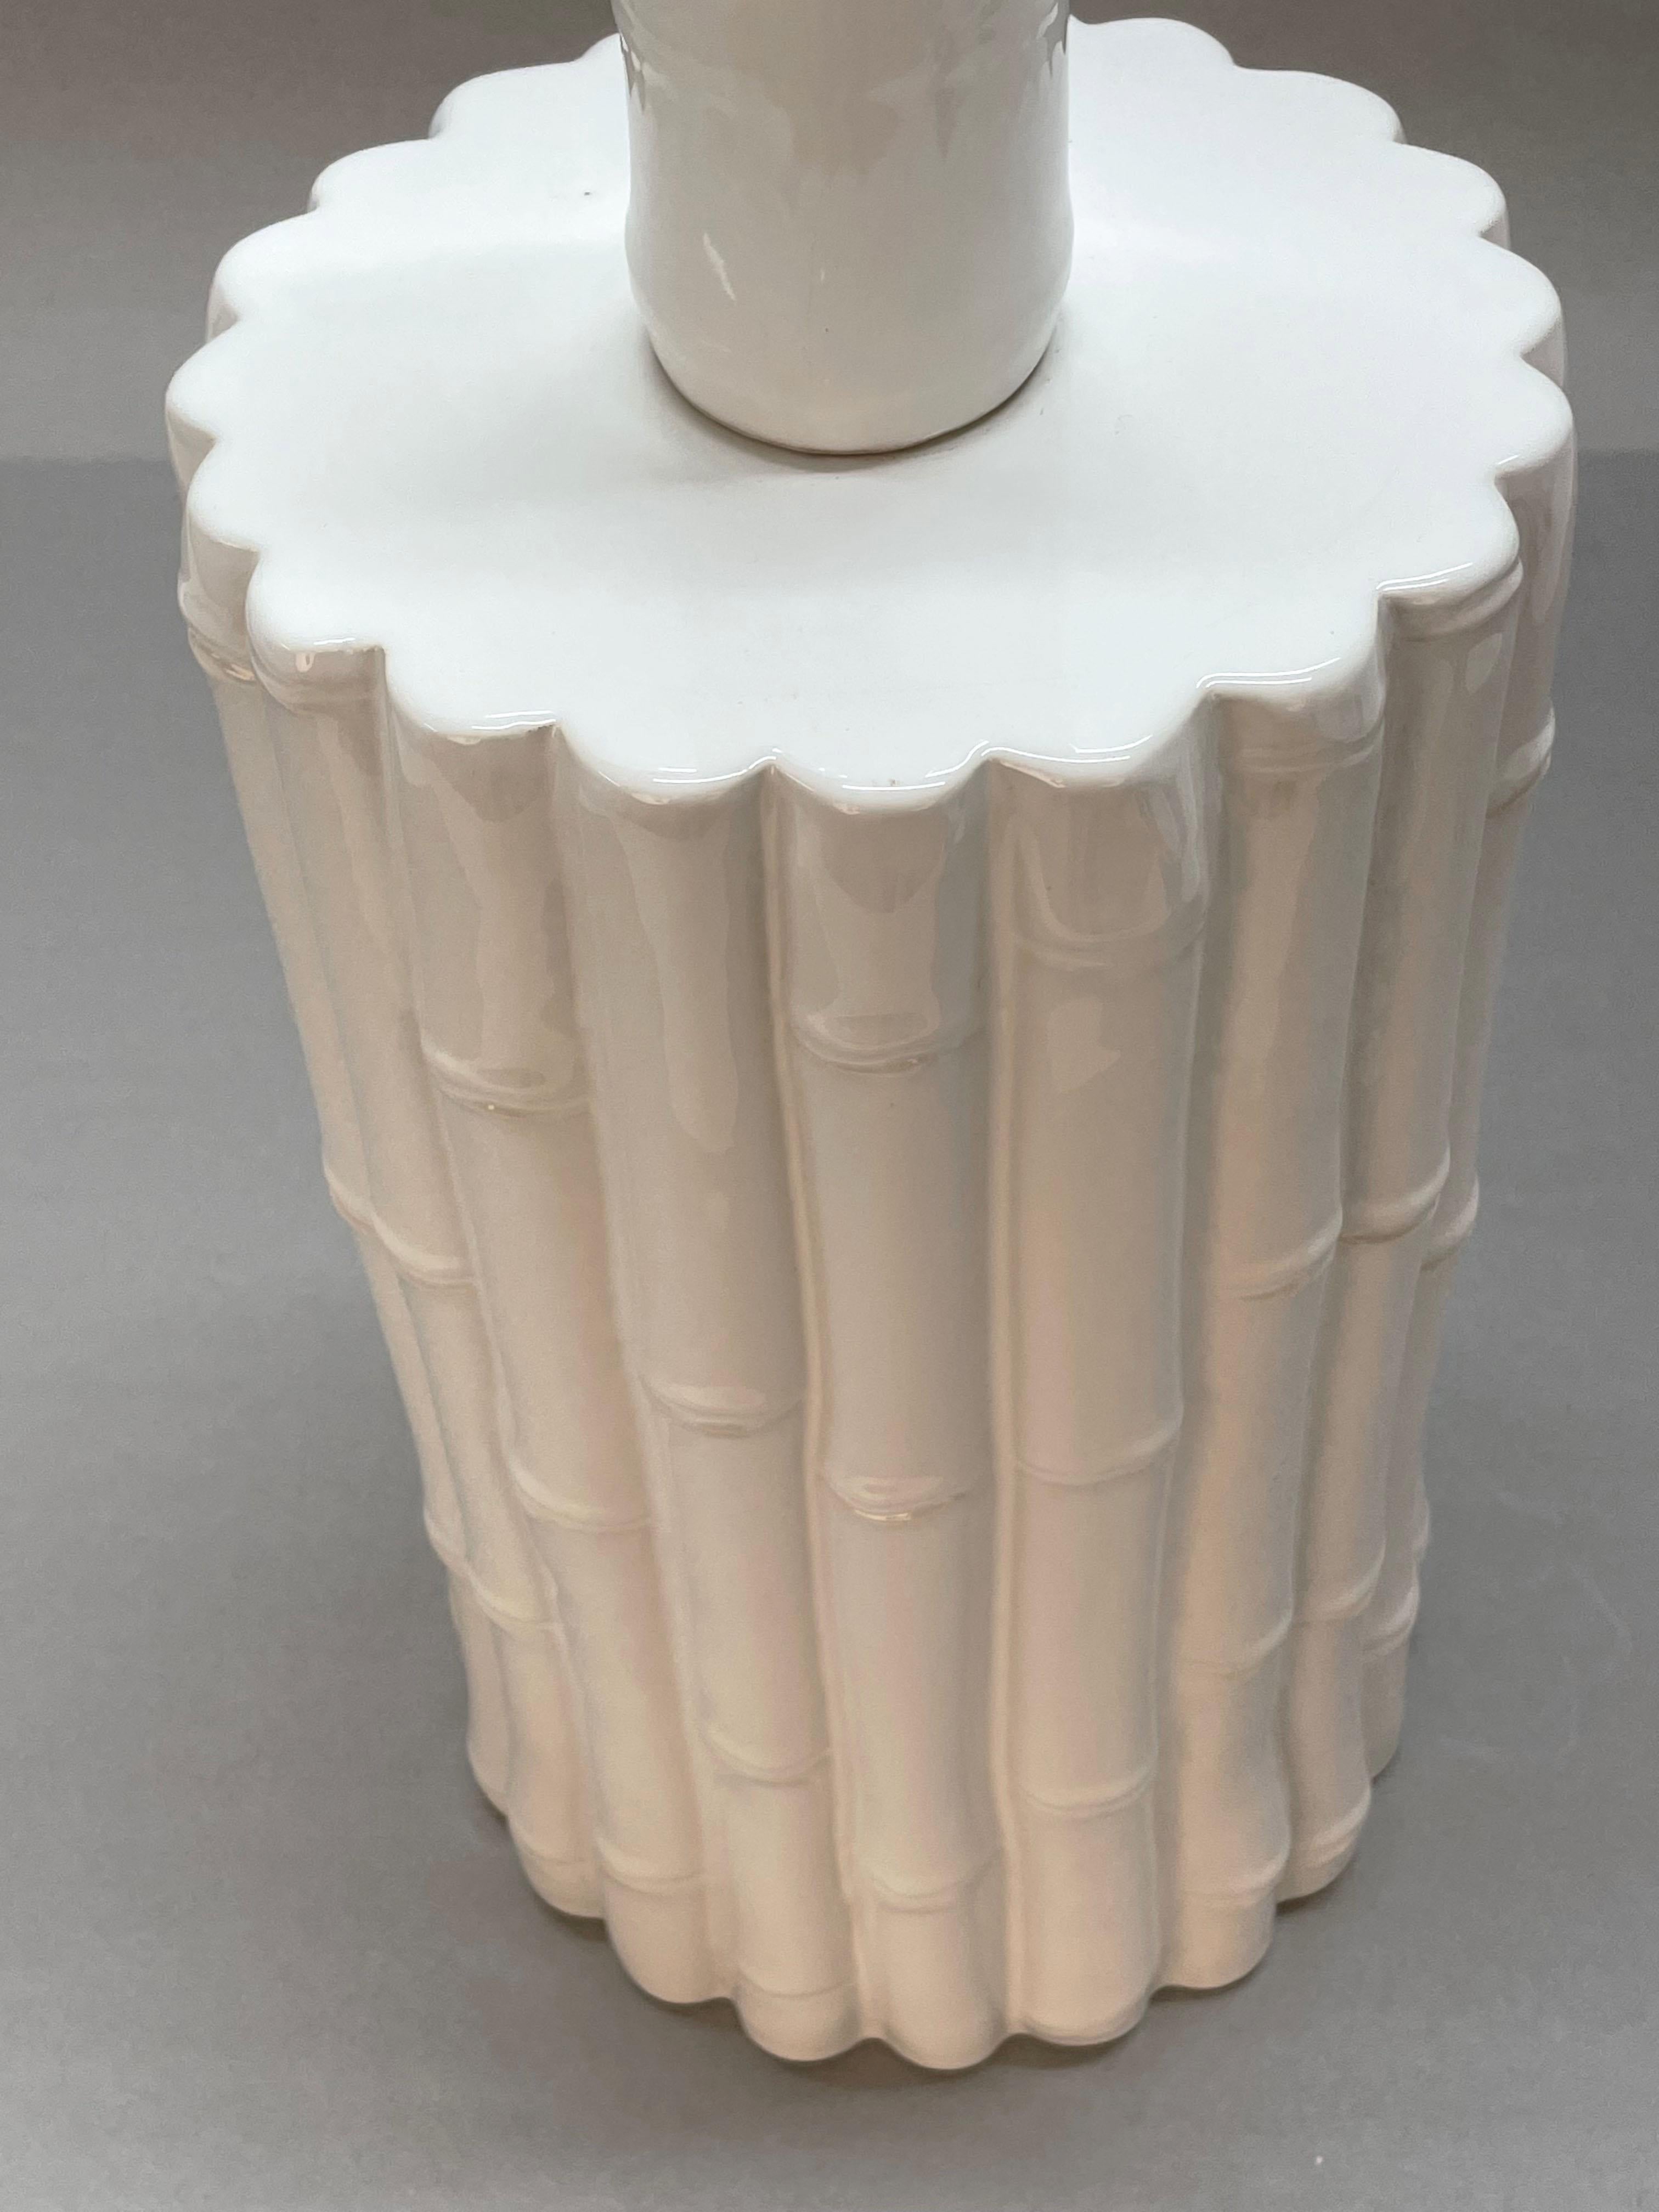 Tommaso Barbi Midcentury White Ceramic and Faux Bamboo Italian Table Lamp, 1970s For Sale 8